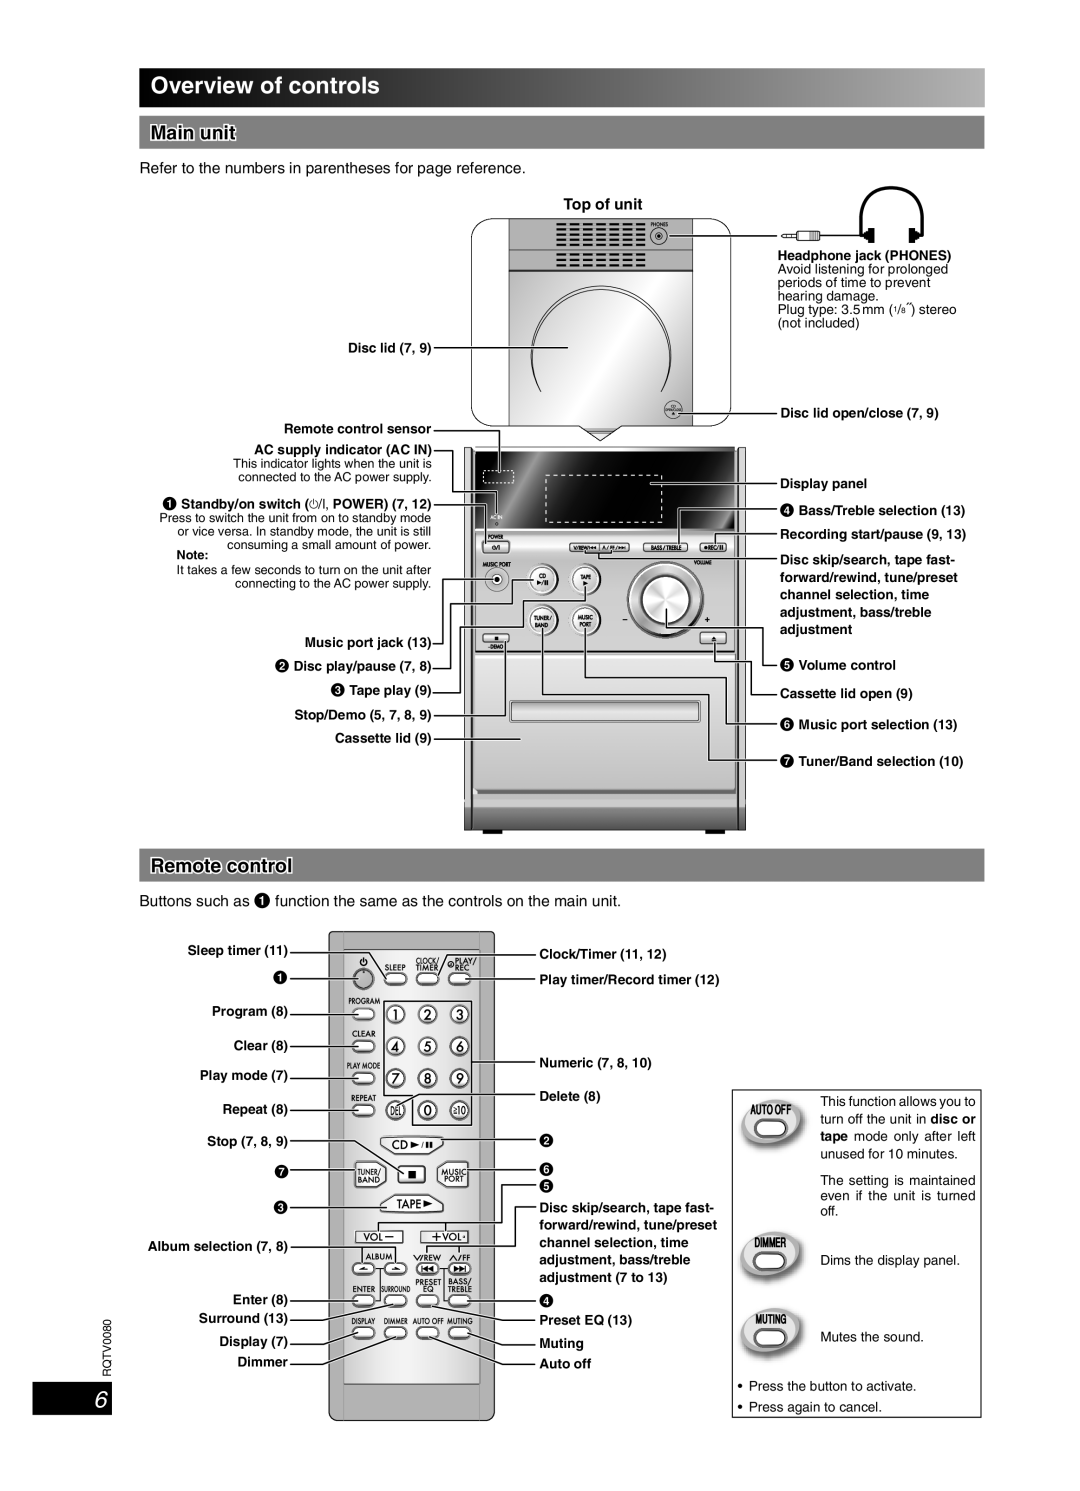 Panasonic SC-PM23, RQTV0080-1P important safety instructions Overview of controls, Main unit, Remote control 